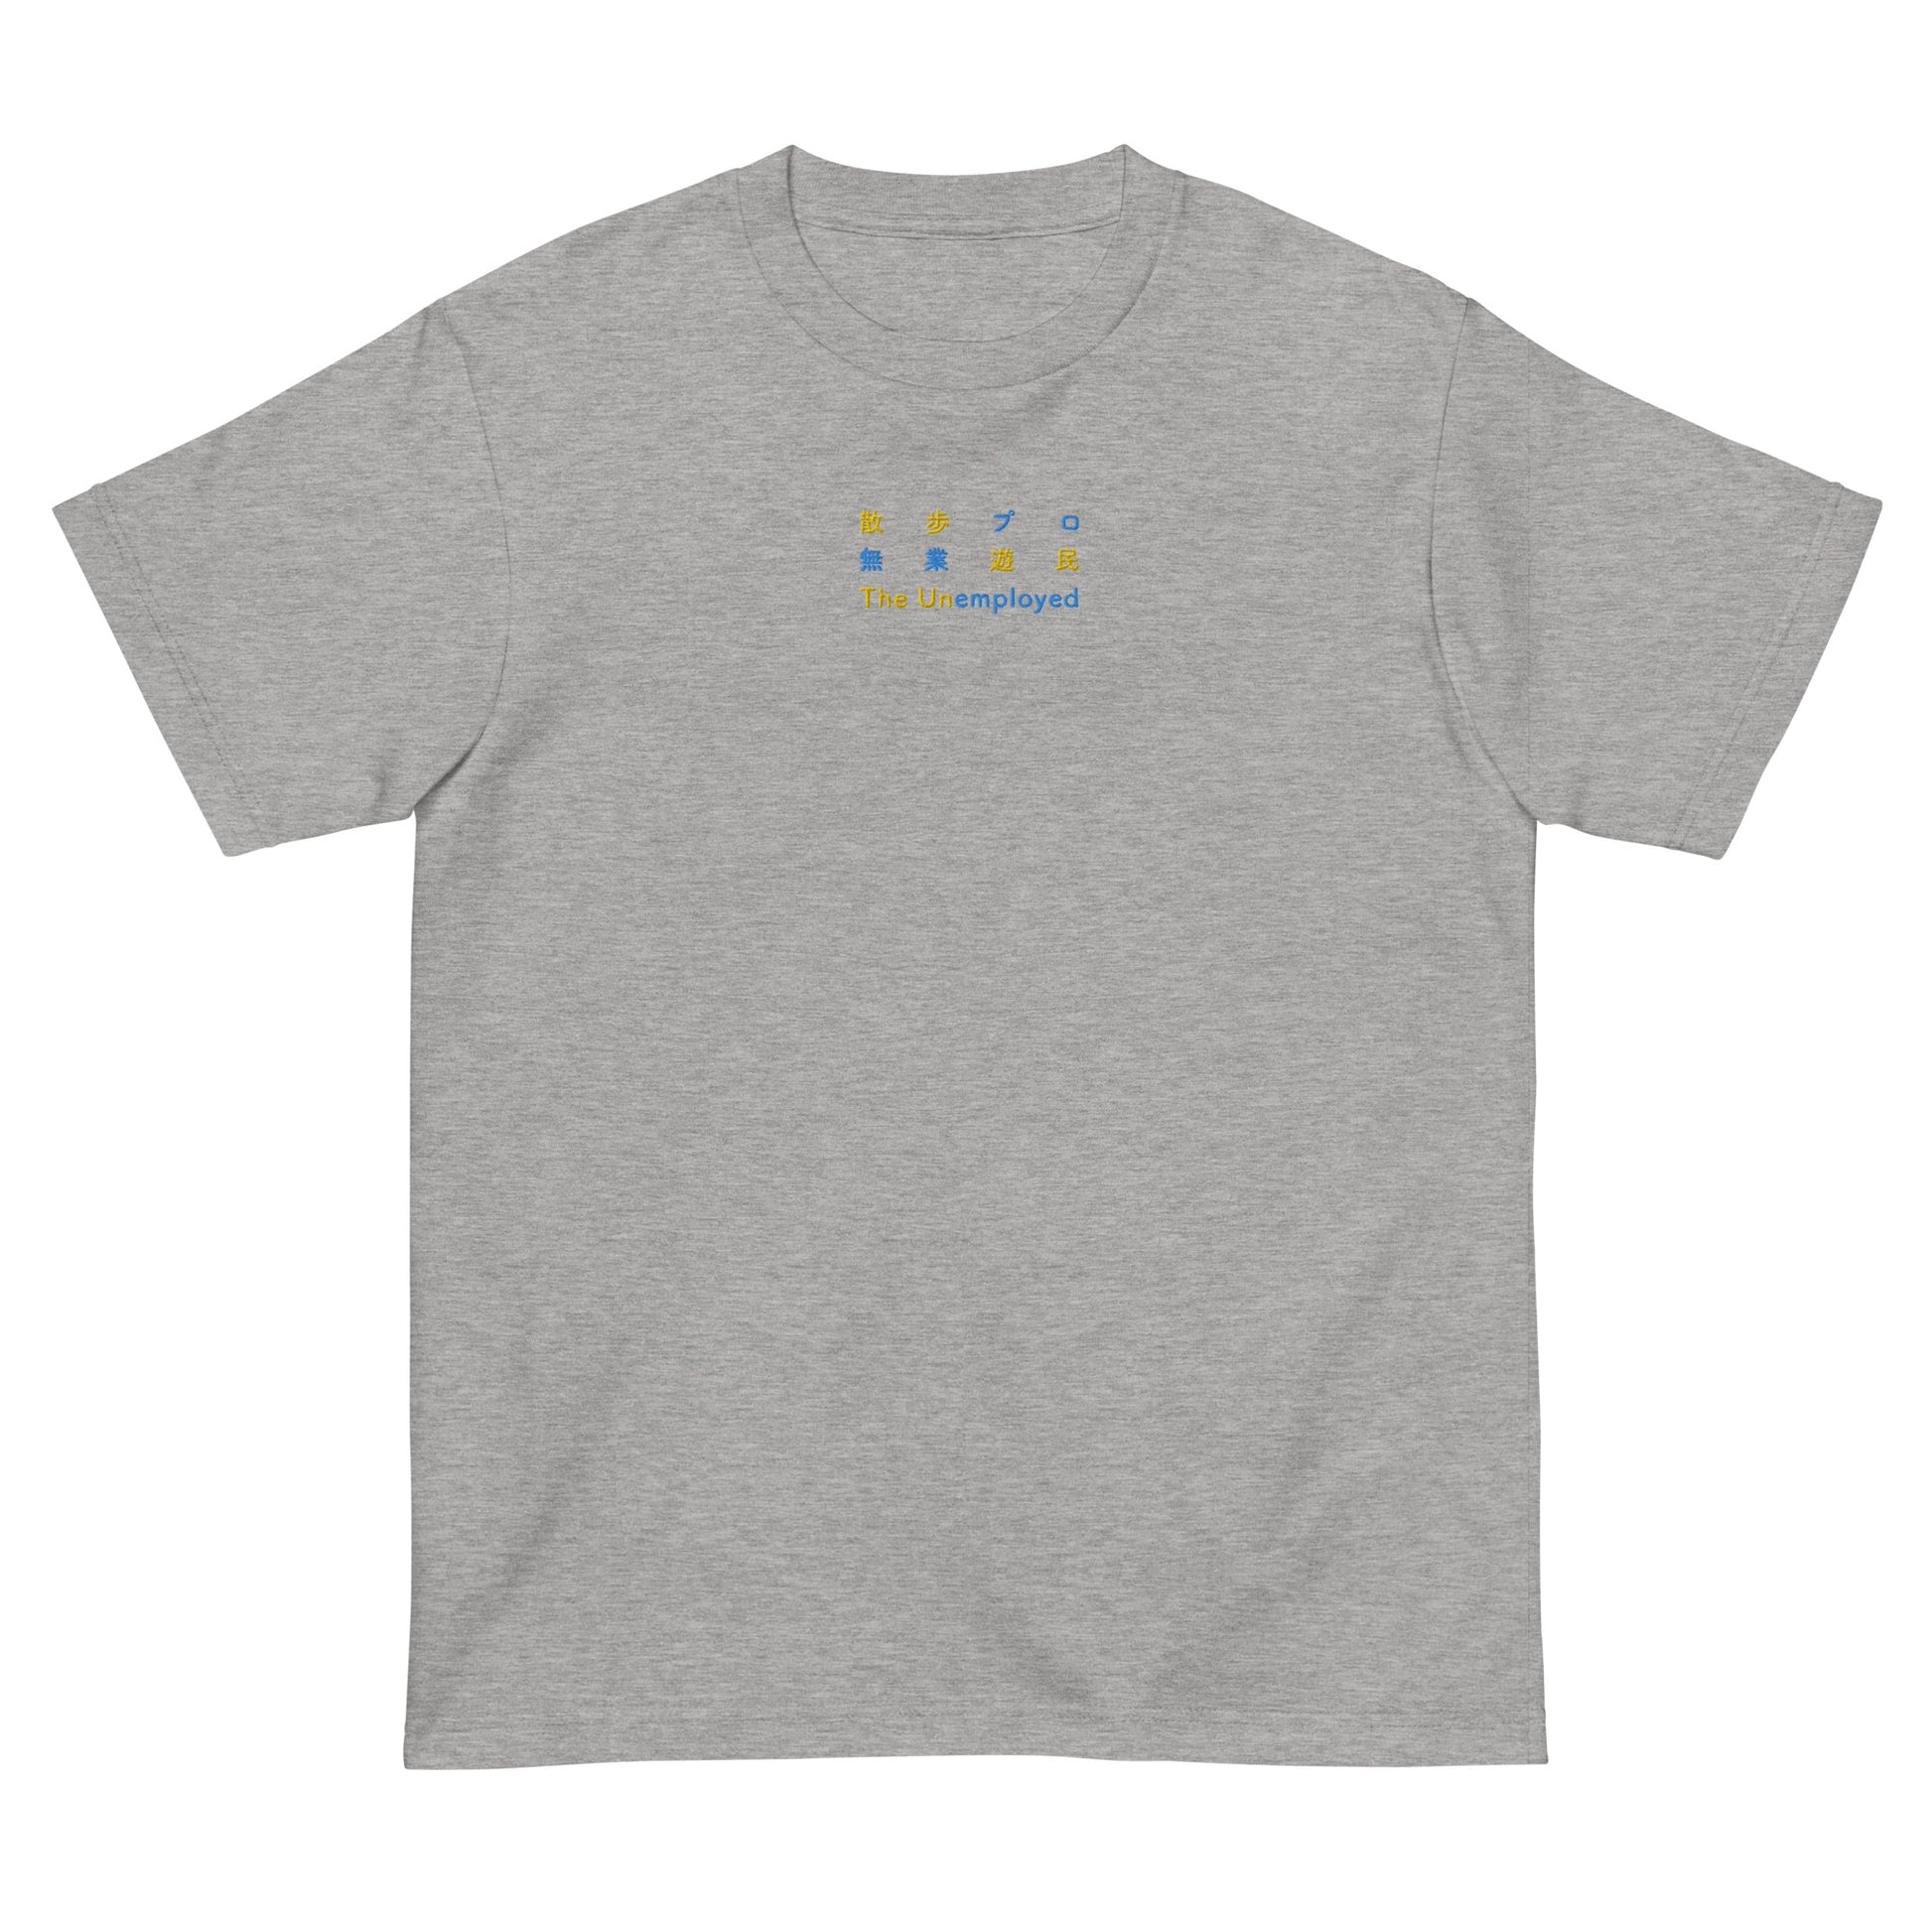 Gray High Quality Tee - Front Design with Yellow/Blue Embroidery "The Unemployed" in three languages